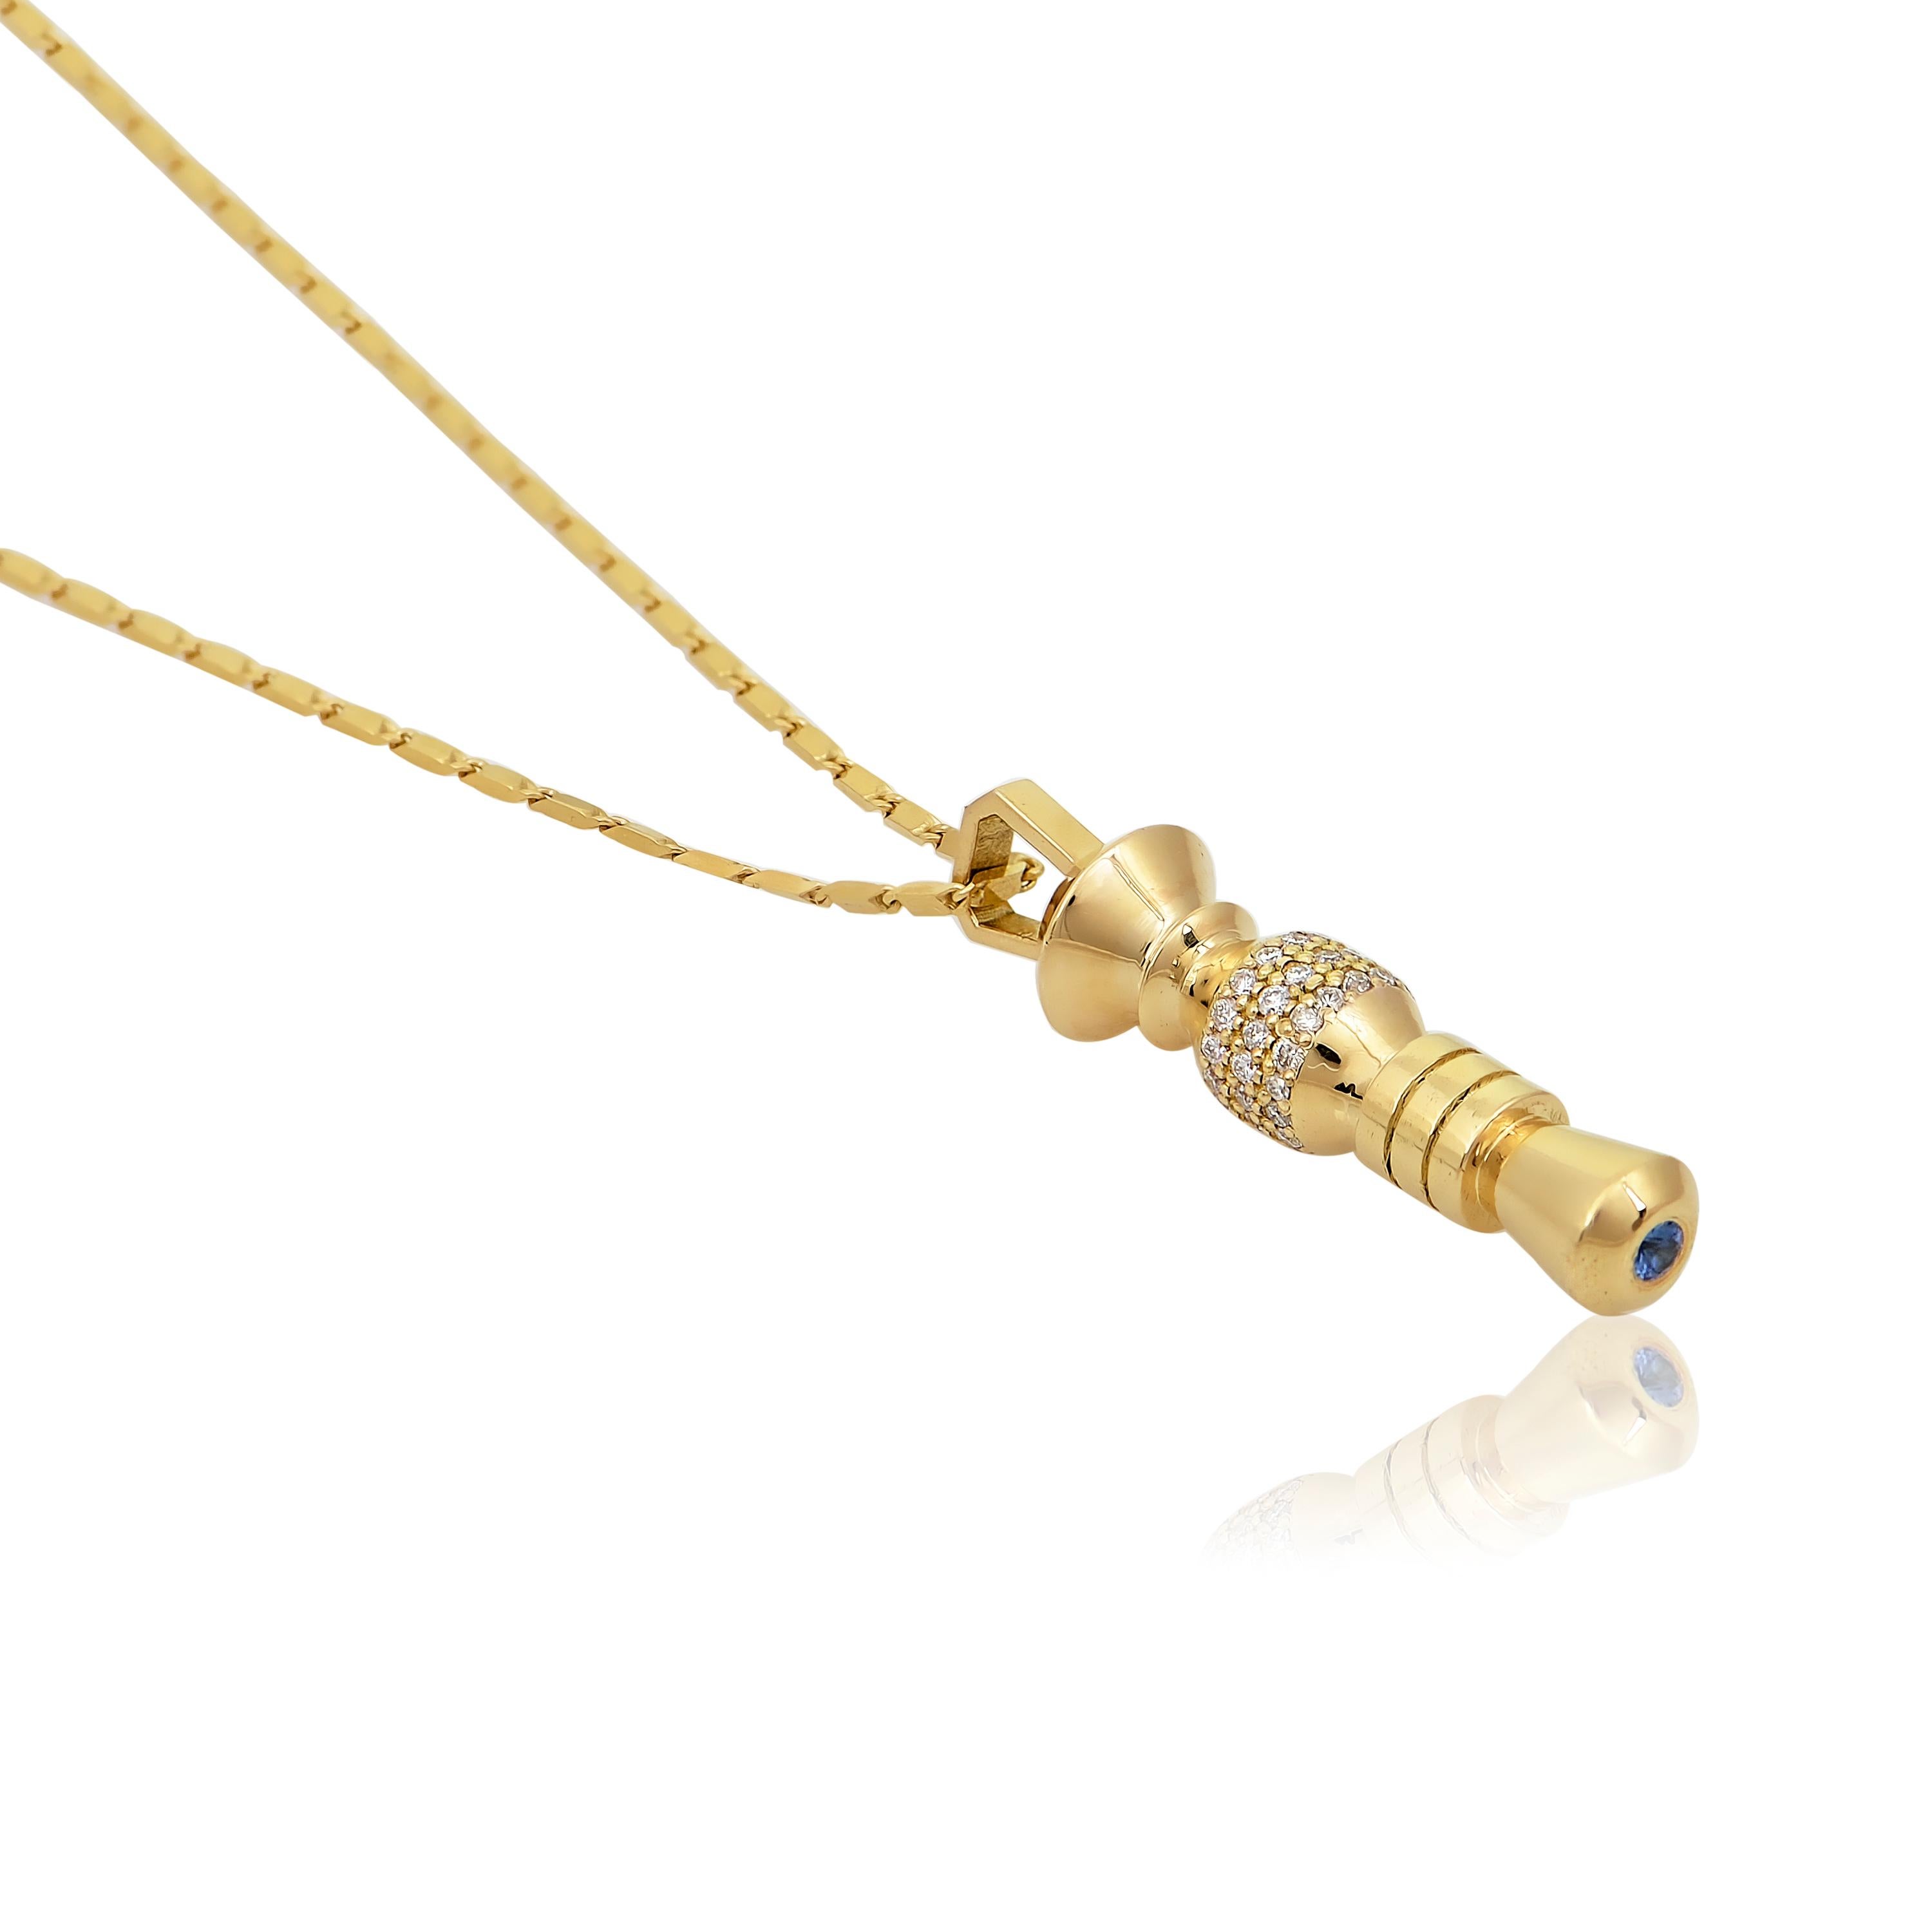 Designer: Alexia Gryllaki

Dimensions: motif 28x4mm, chain 500mm
Weight: approximately 8.1g  (inc. chain)
Barcode: NEX3002


Totem pendant in 18 karat yellow gold with round brilliant-cut diamonds approx. 0.19cts and a round faceted sapphire approx.